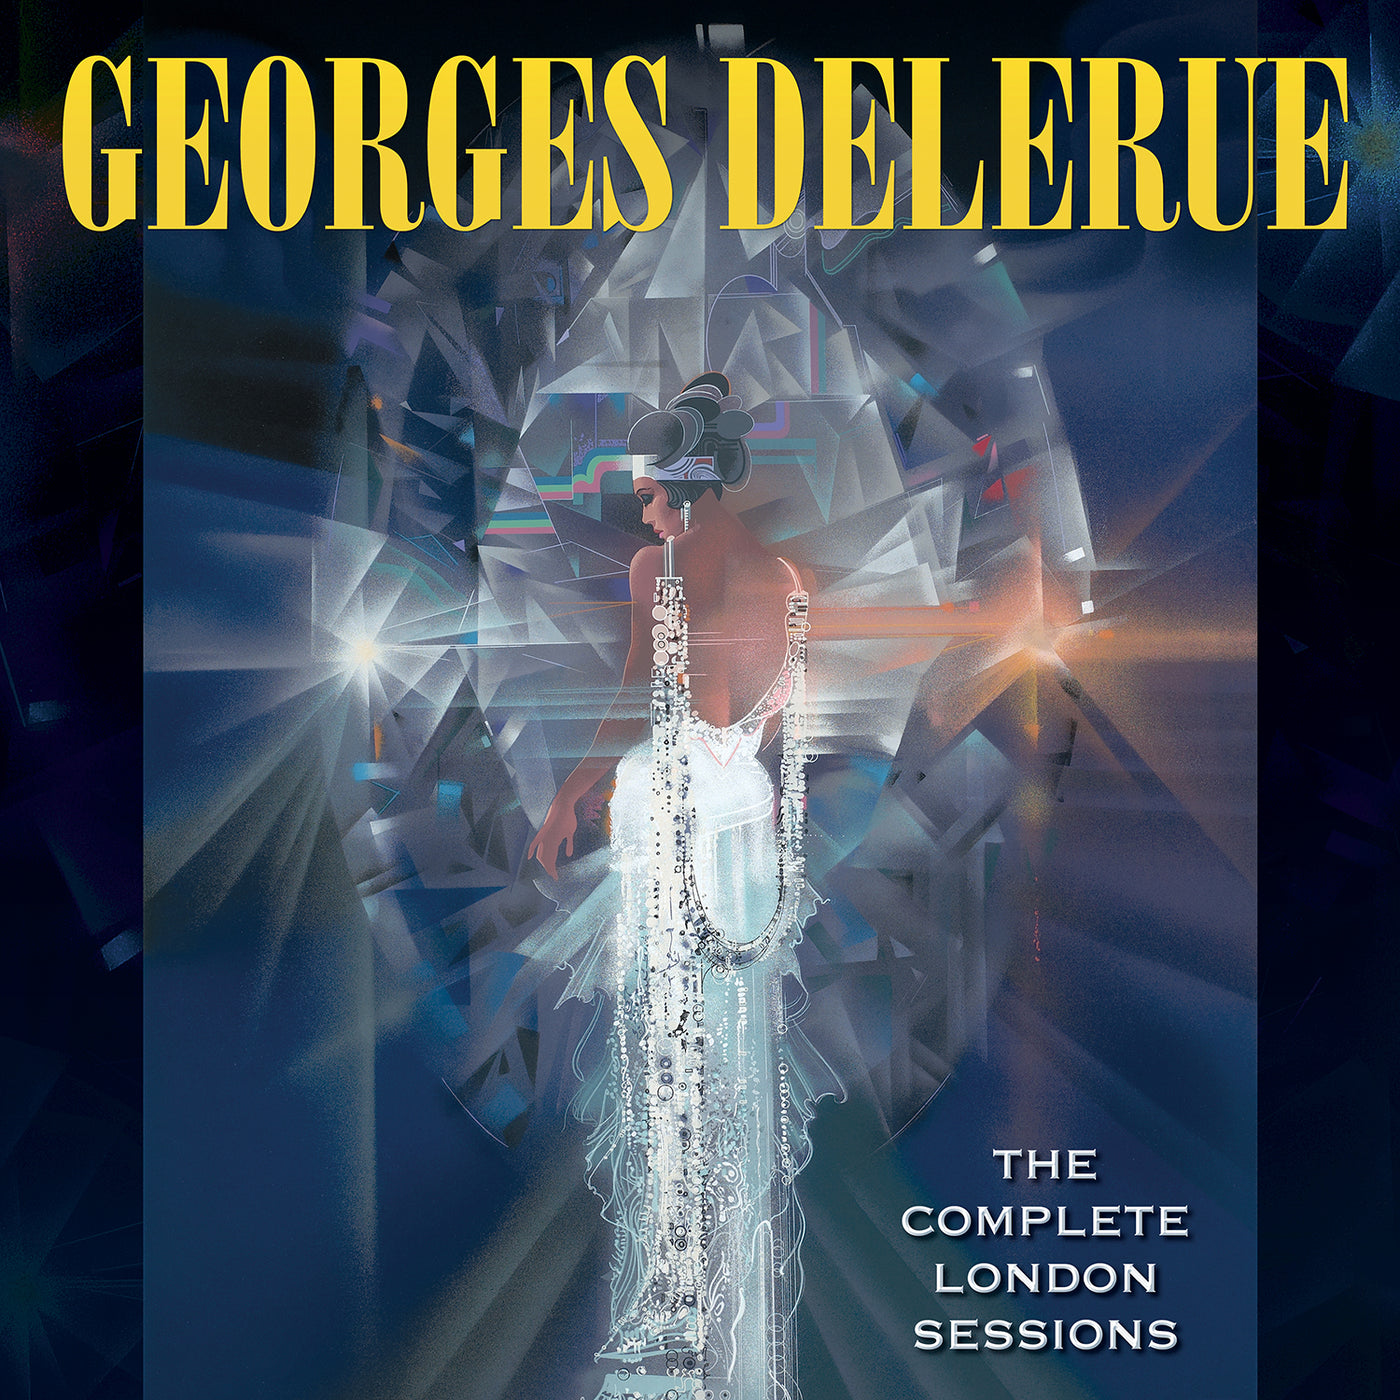 Georges Delerue: The Complete London Sessions (CD)